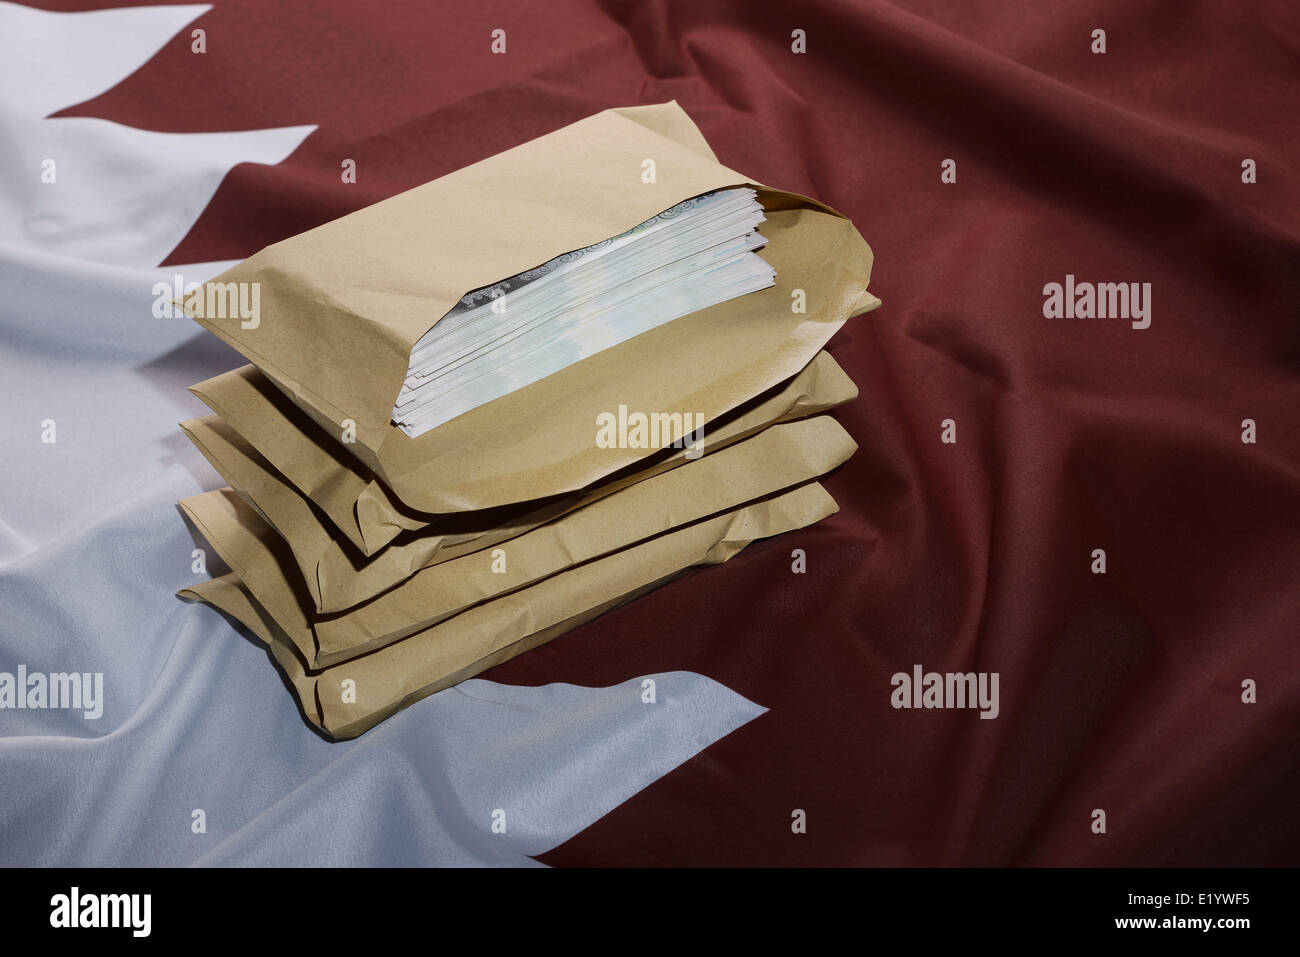 Qatar flag with brown envelopes full of money Stock Photo